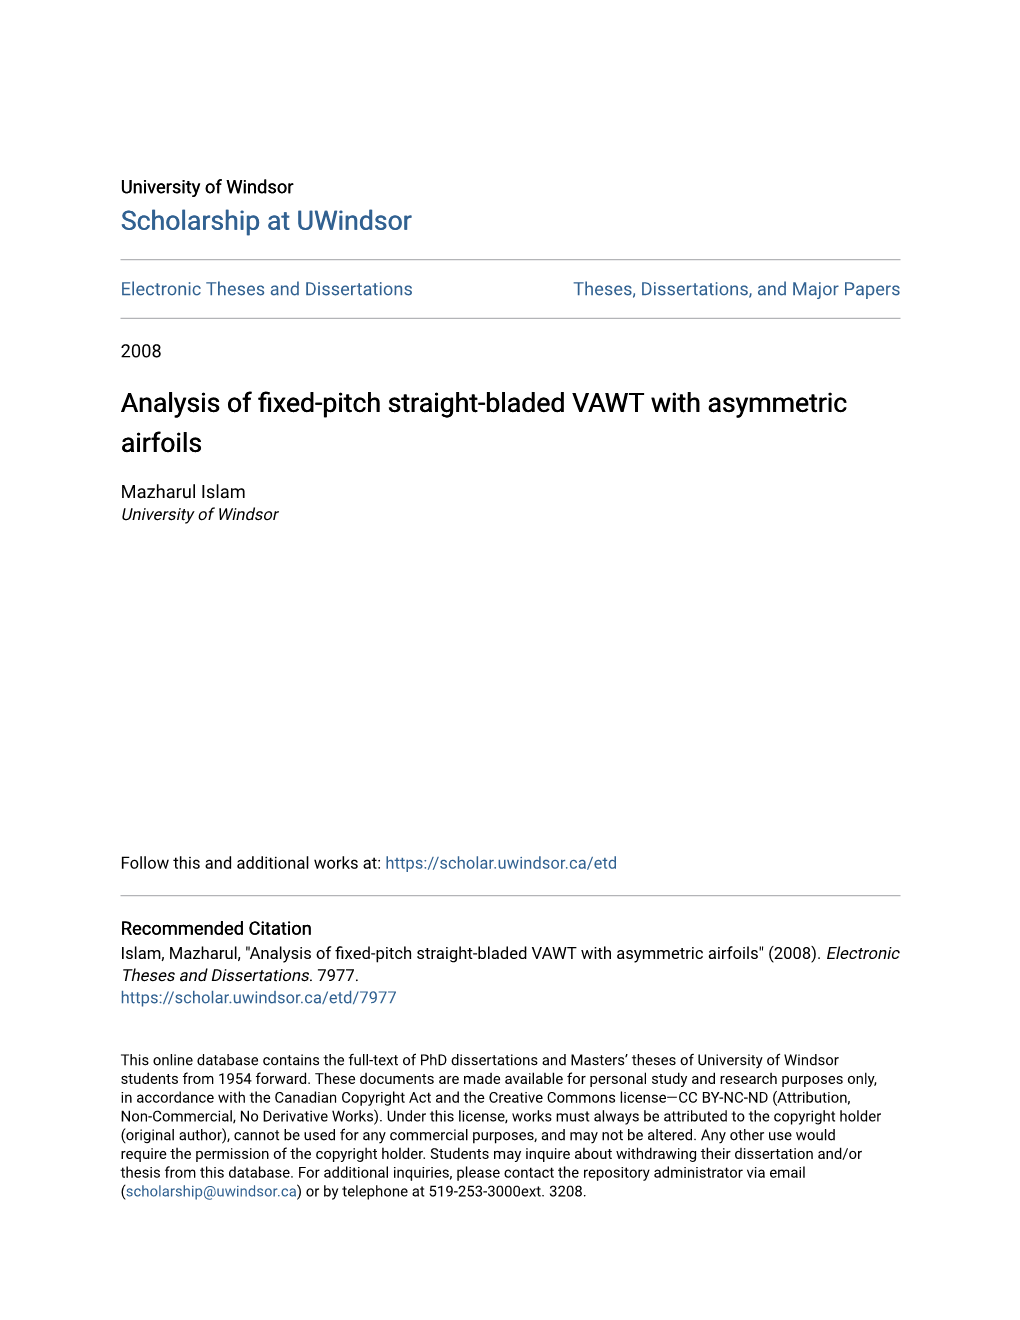 Analysis of Fixed-Pitch Straight-Bladed VAWT with Asymmetric Airfoils